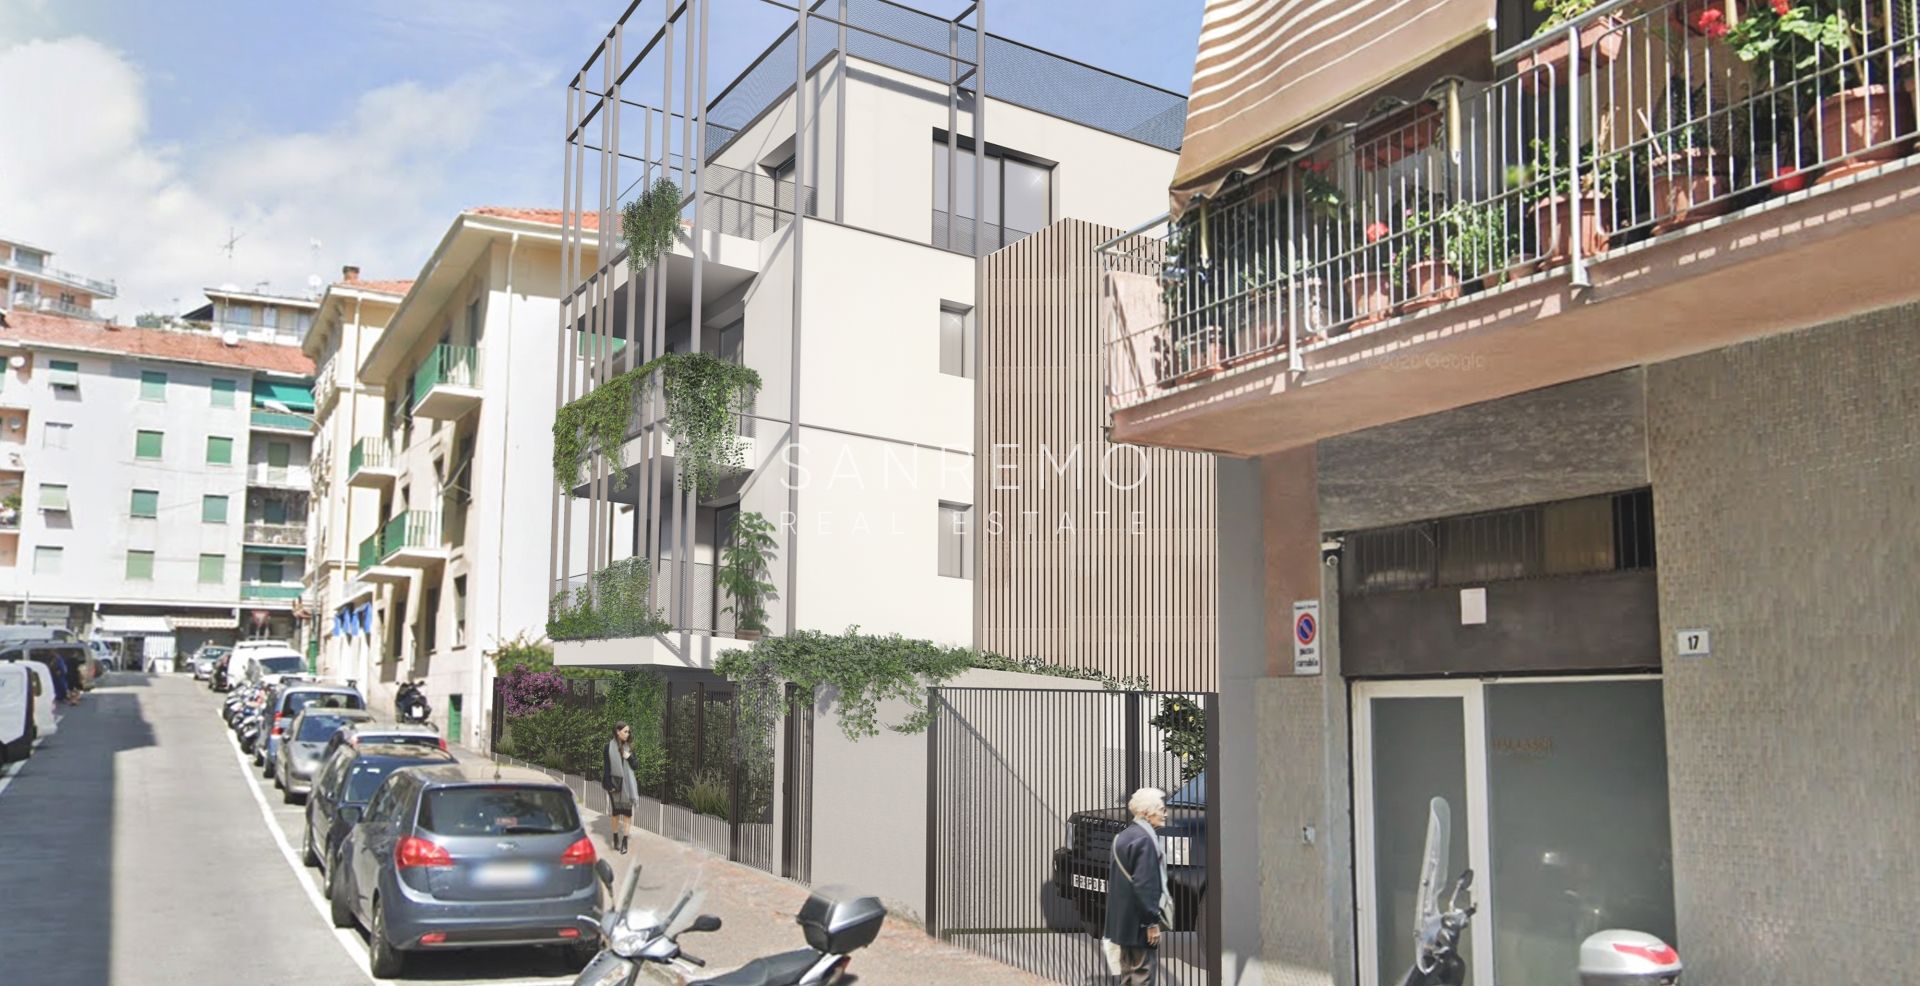 New small building in via Vesco with parkings and terraces